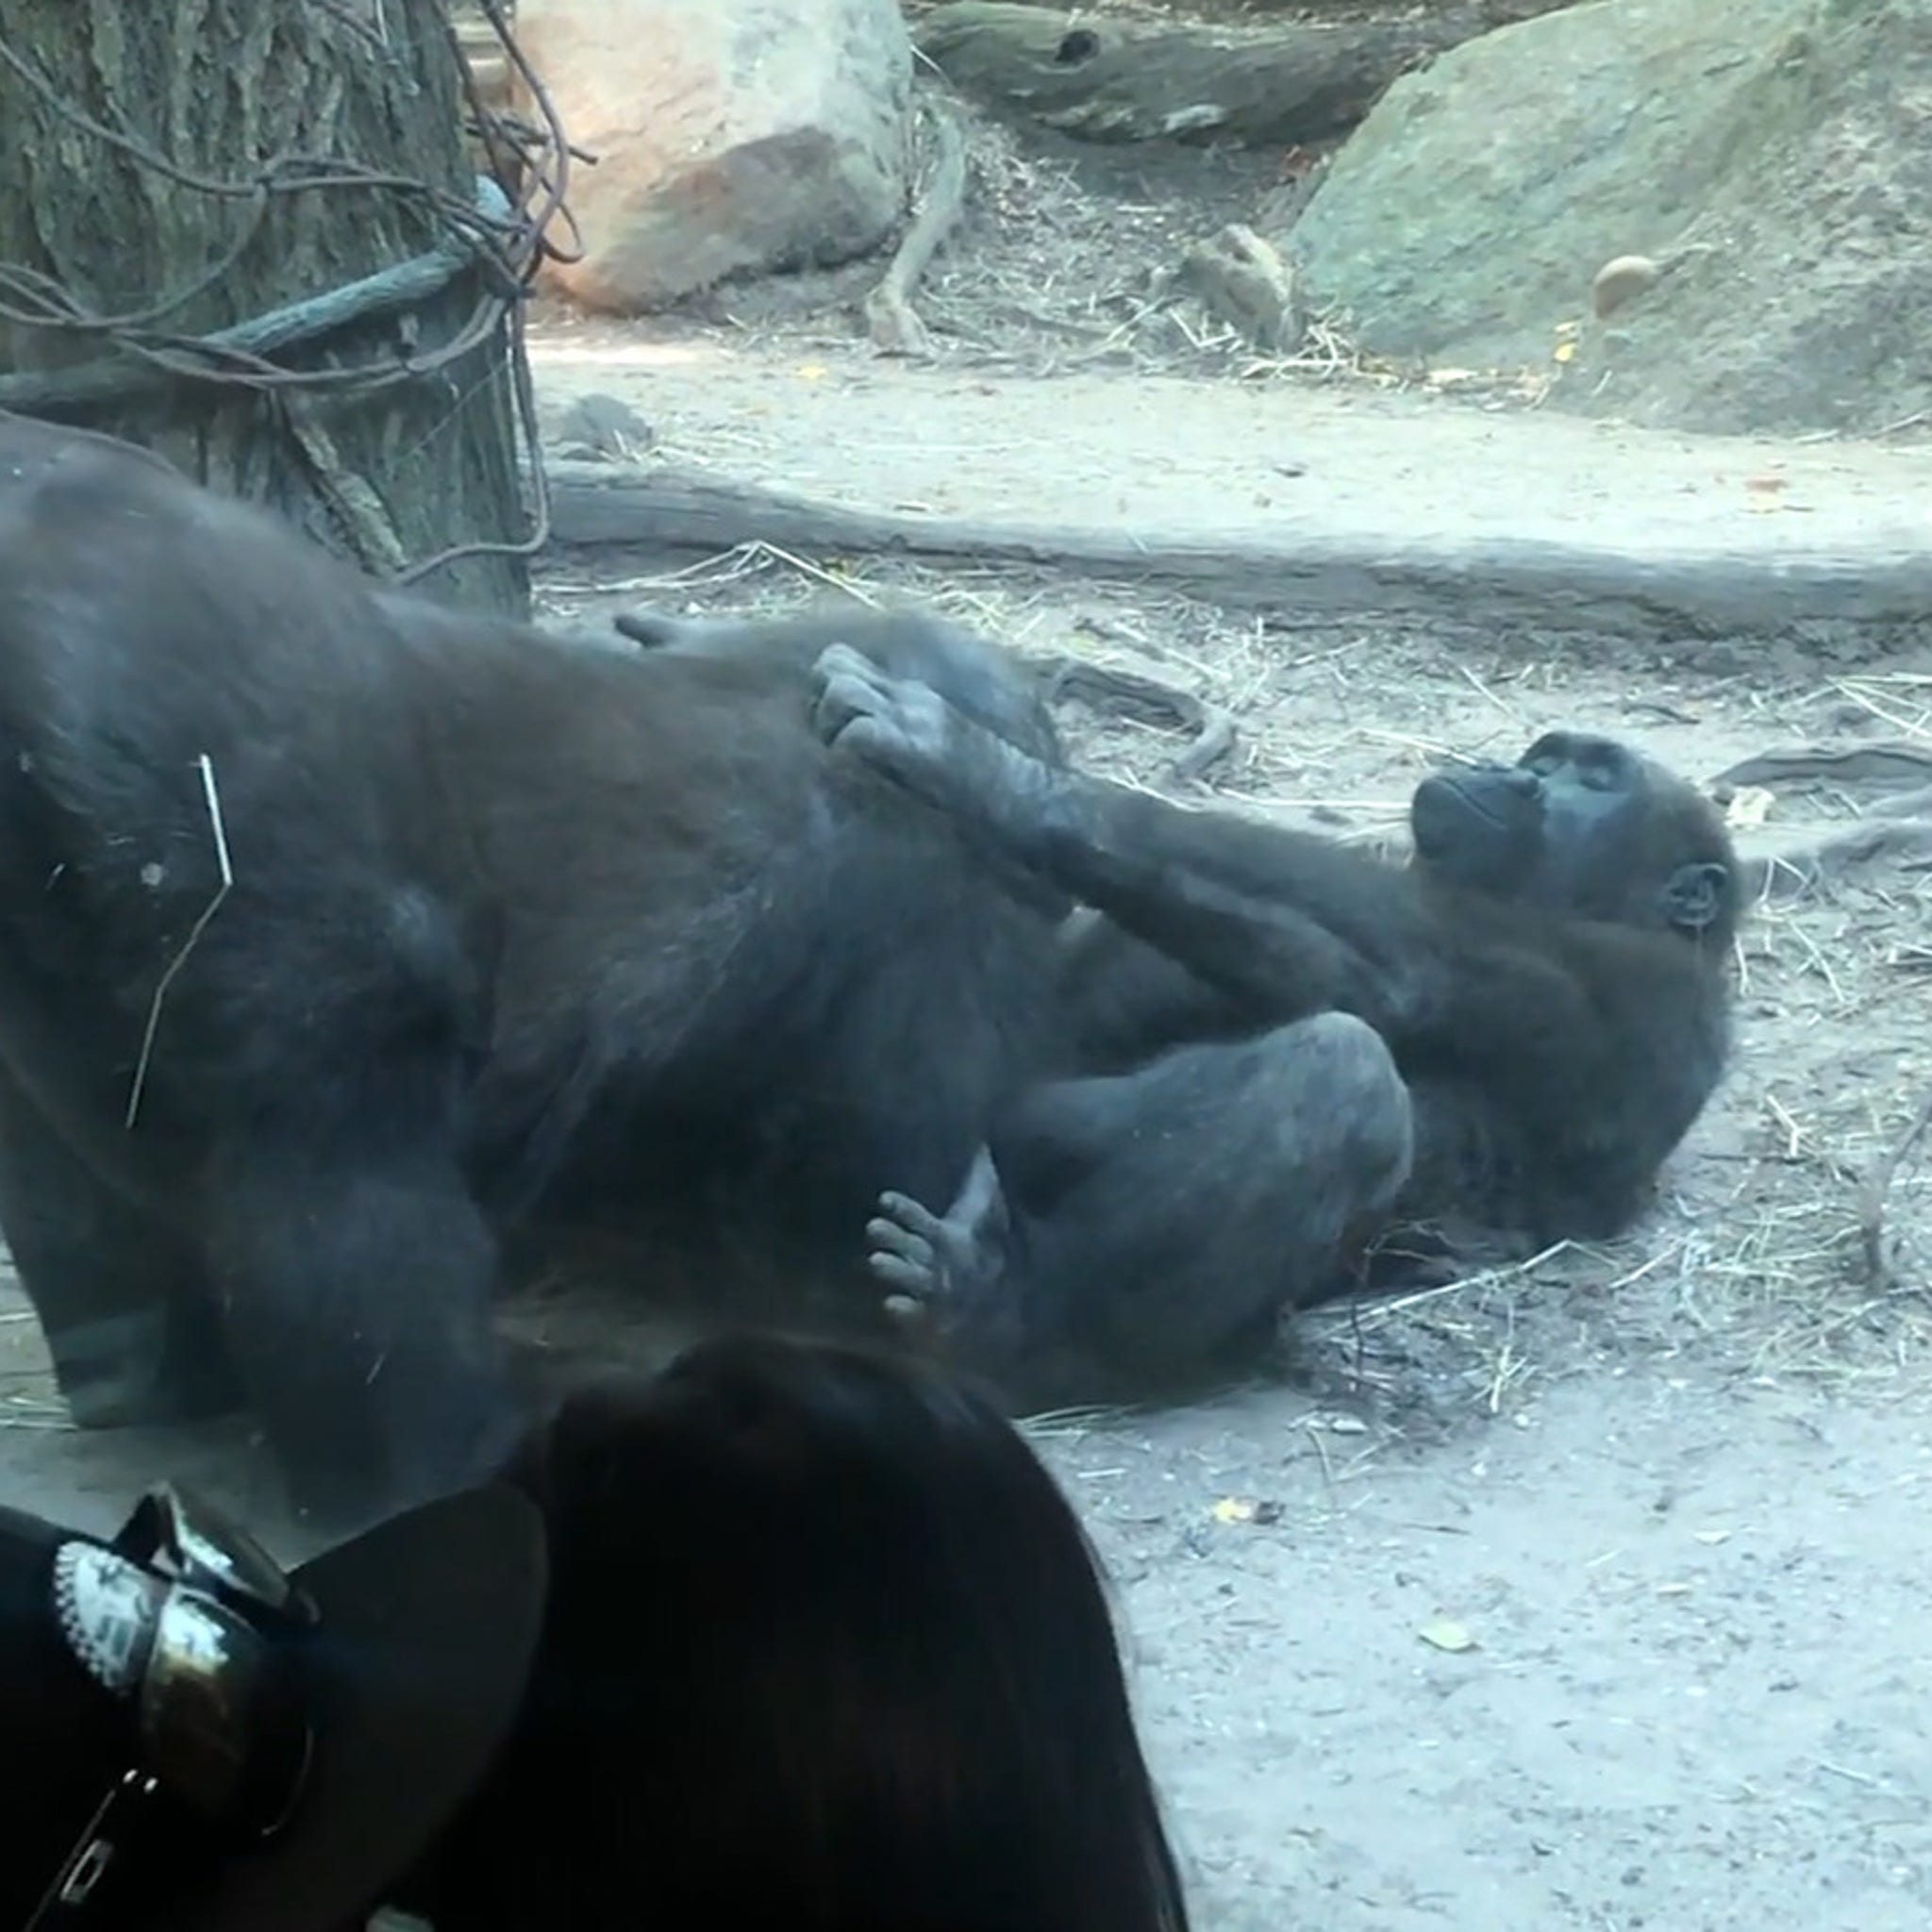 Forced Oral Sex - Gorillas Perform Oral Sex at Bronx Zoo, Humans Horrified